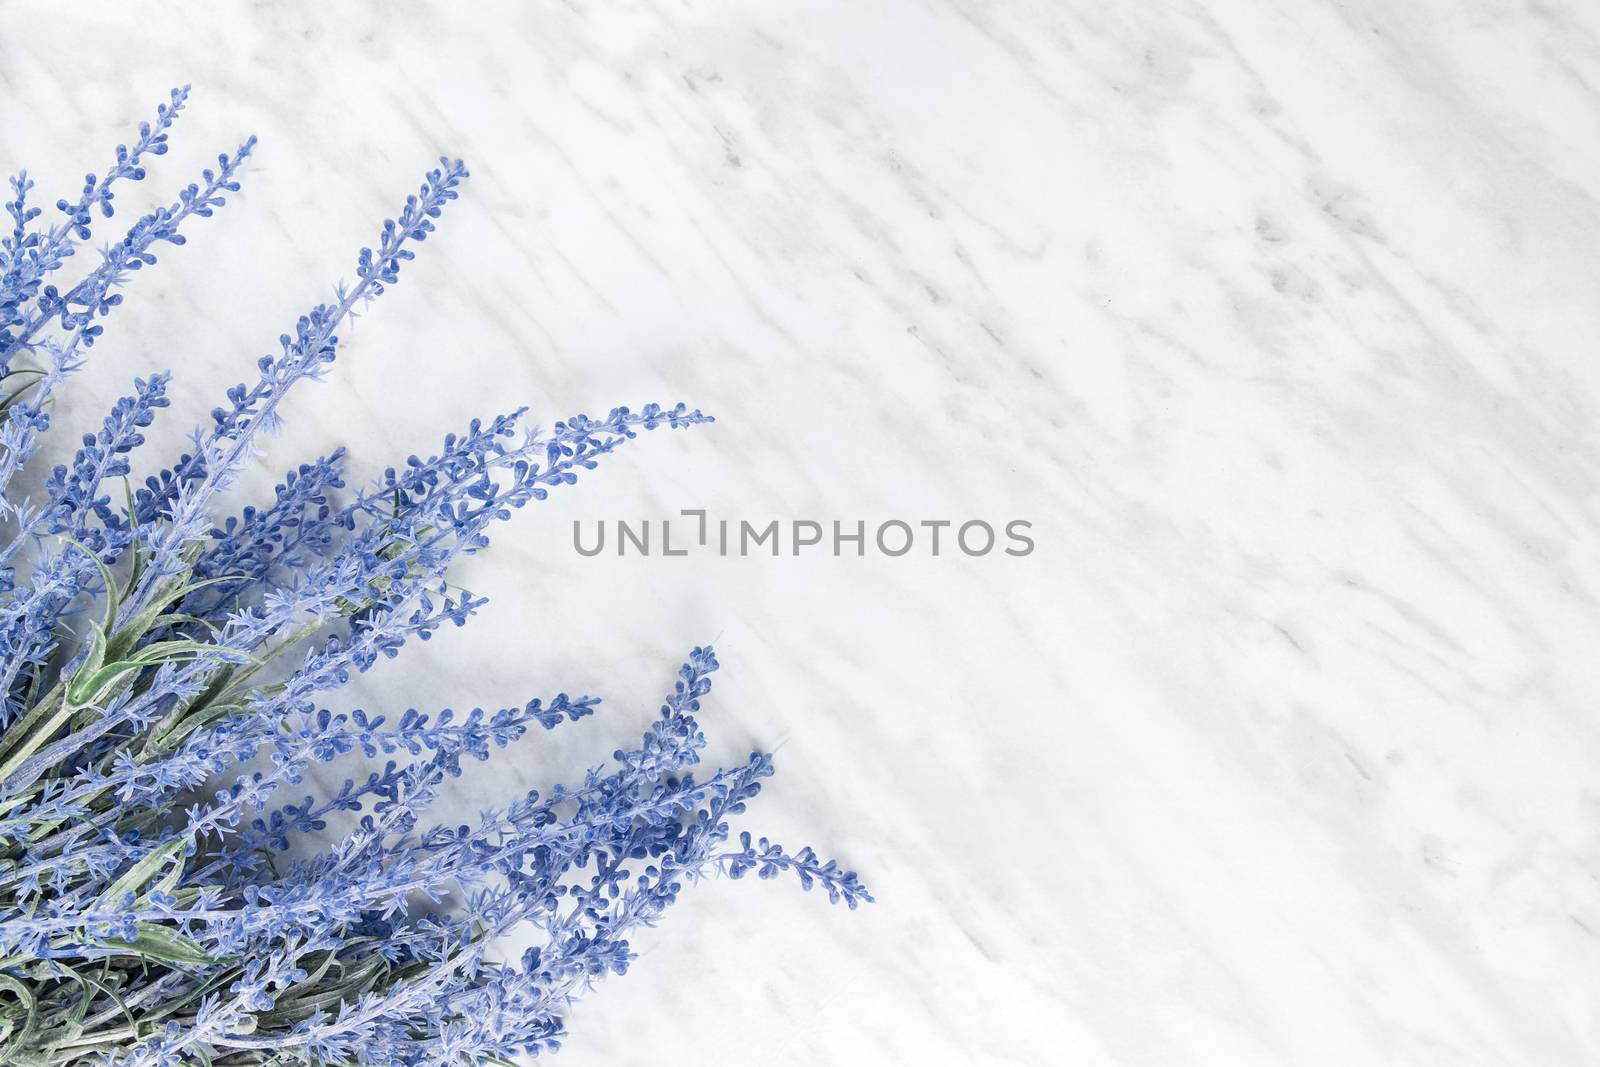 Blooming lavender on marble background with copy space on the right.